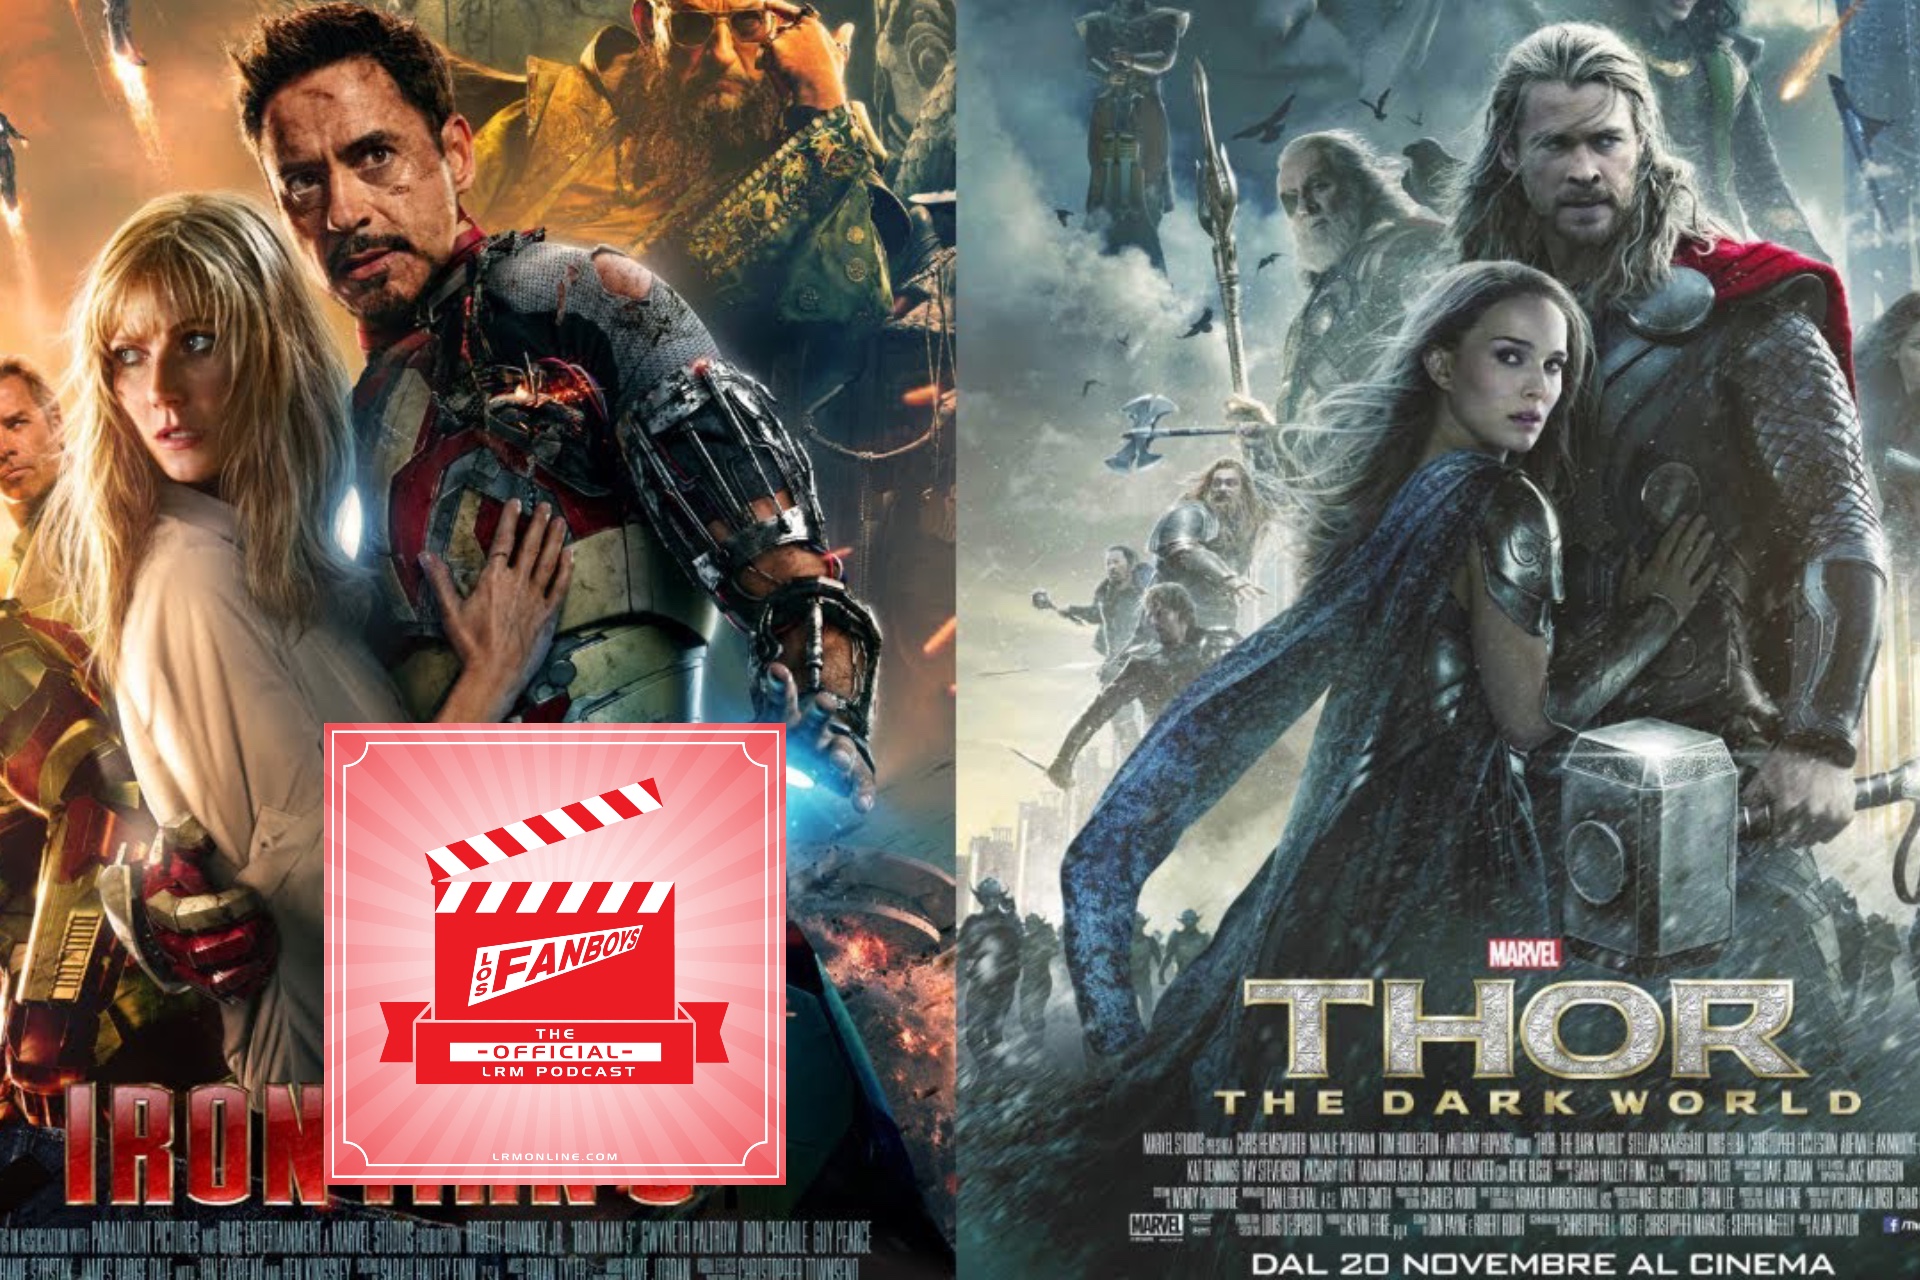 Did Iron Man 3 And Thor 2 Shape The MCU As We Know It? | Los Fanboys